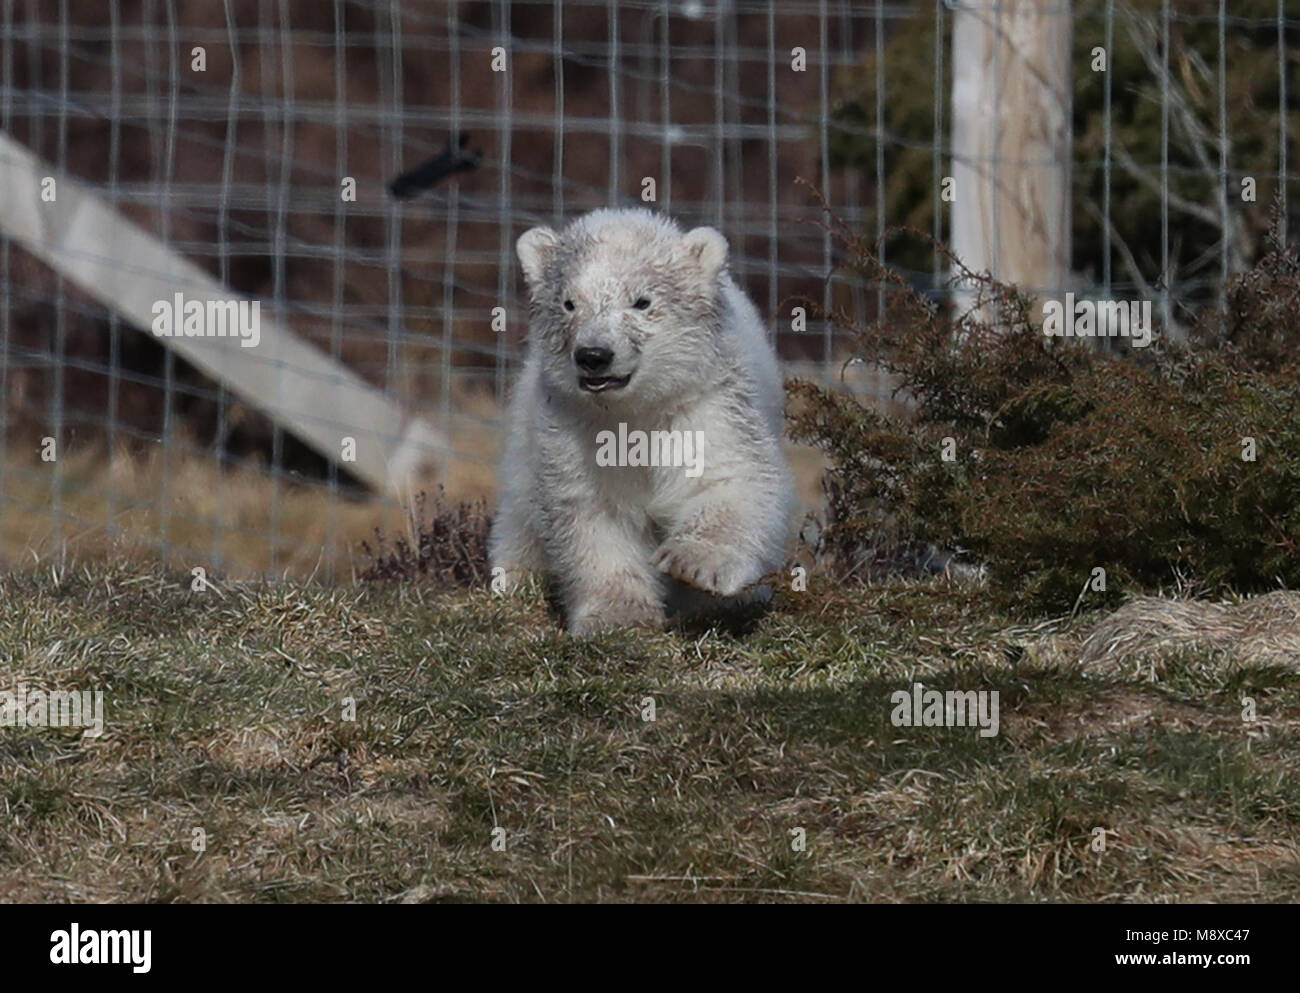 The First Polar Bear Cub To Be Born In The Uk For 25 Years As Of Yet